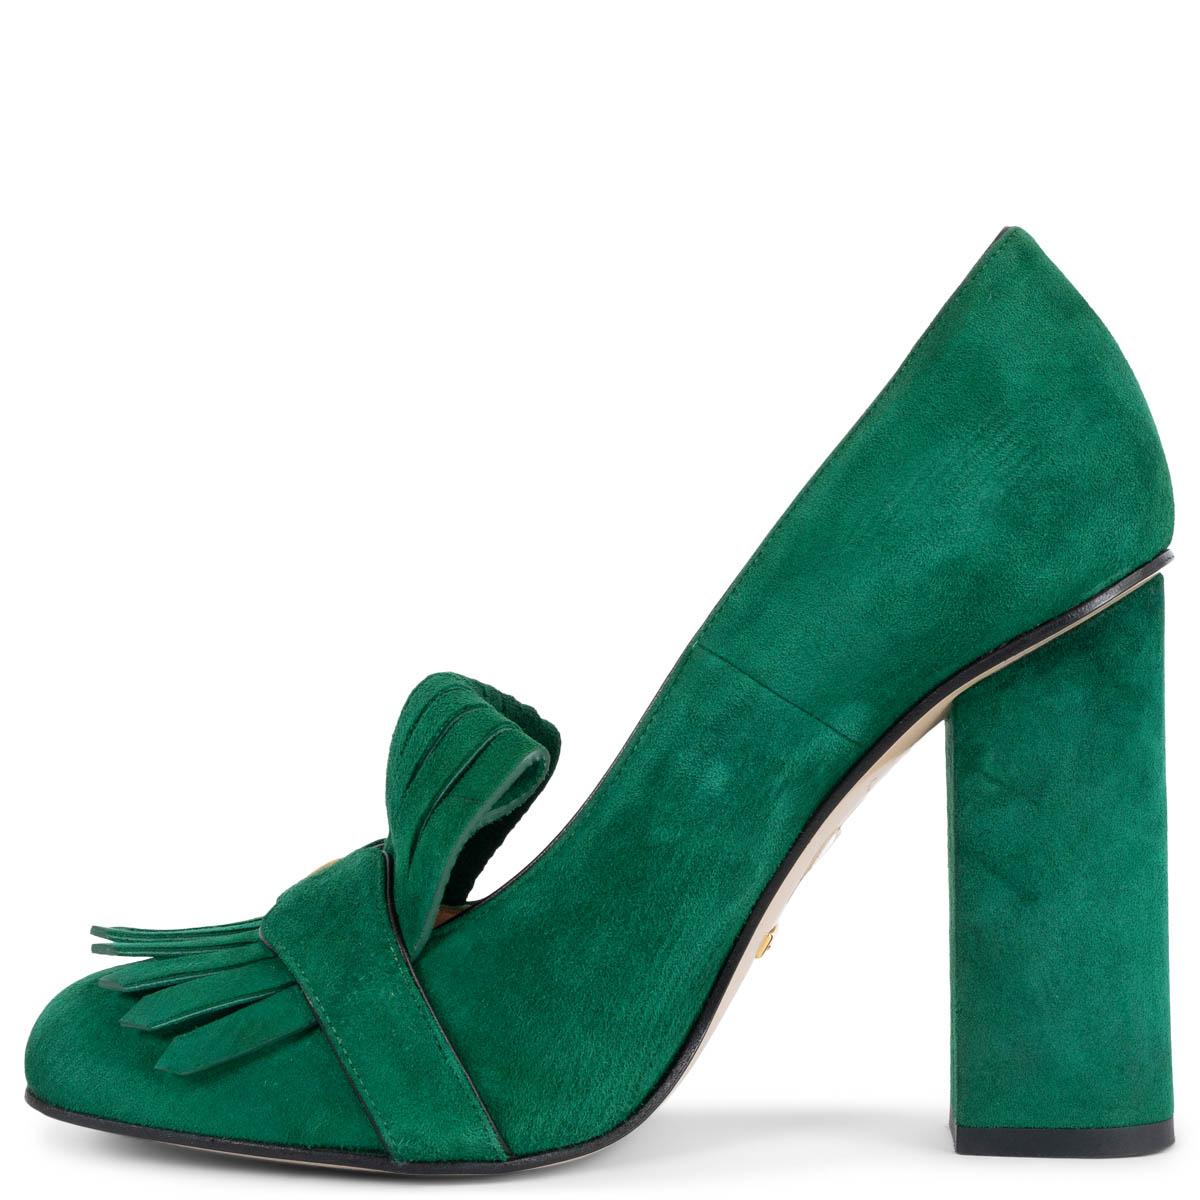 Green GUCCI emerald green suede GG MARMONT 105 FRINGE Pumps Shoes 38.5